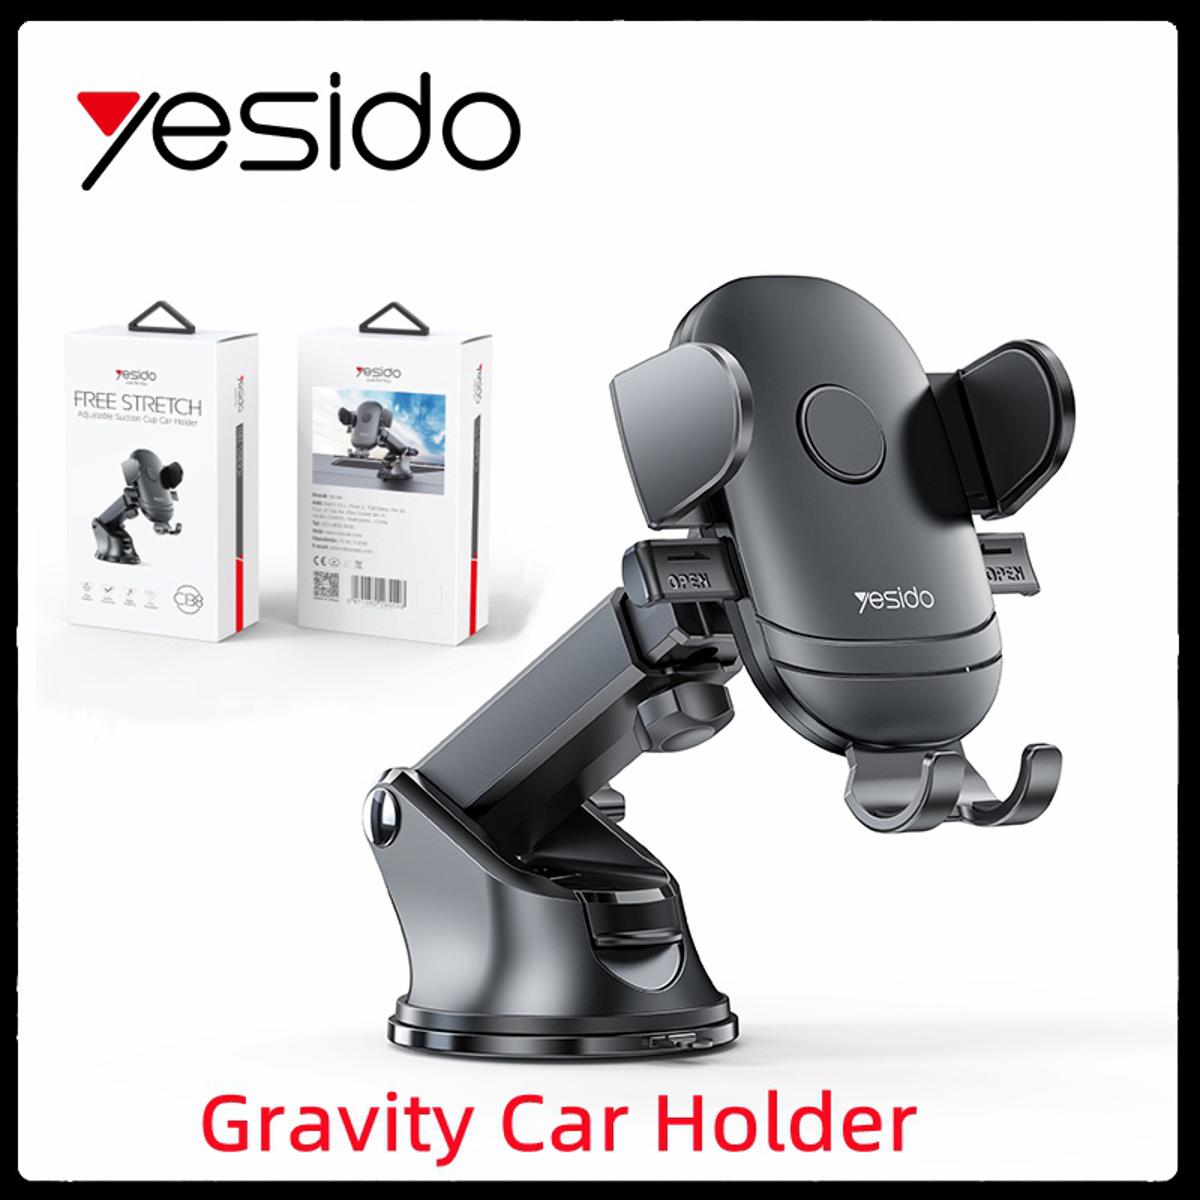 Yesido Free Stretch Adjustable Suction Cup Car Holder C138